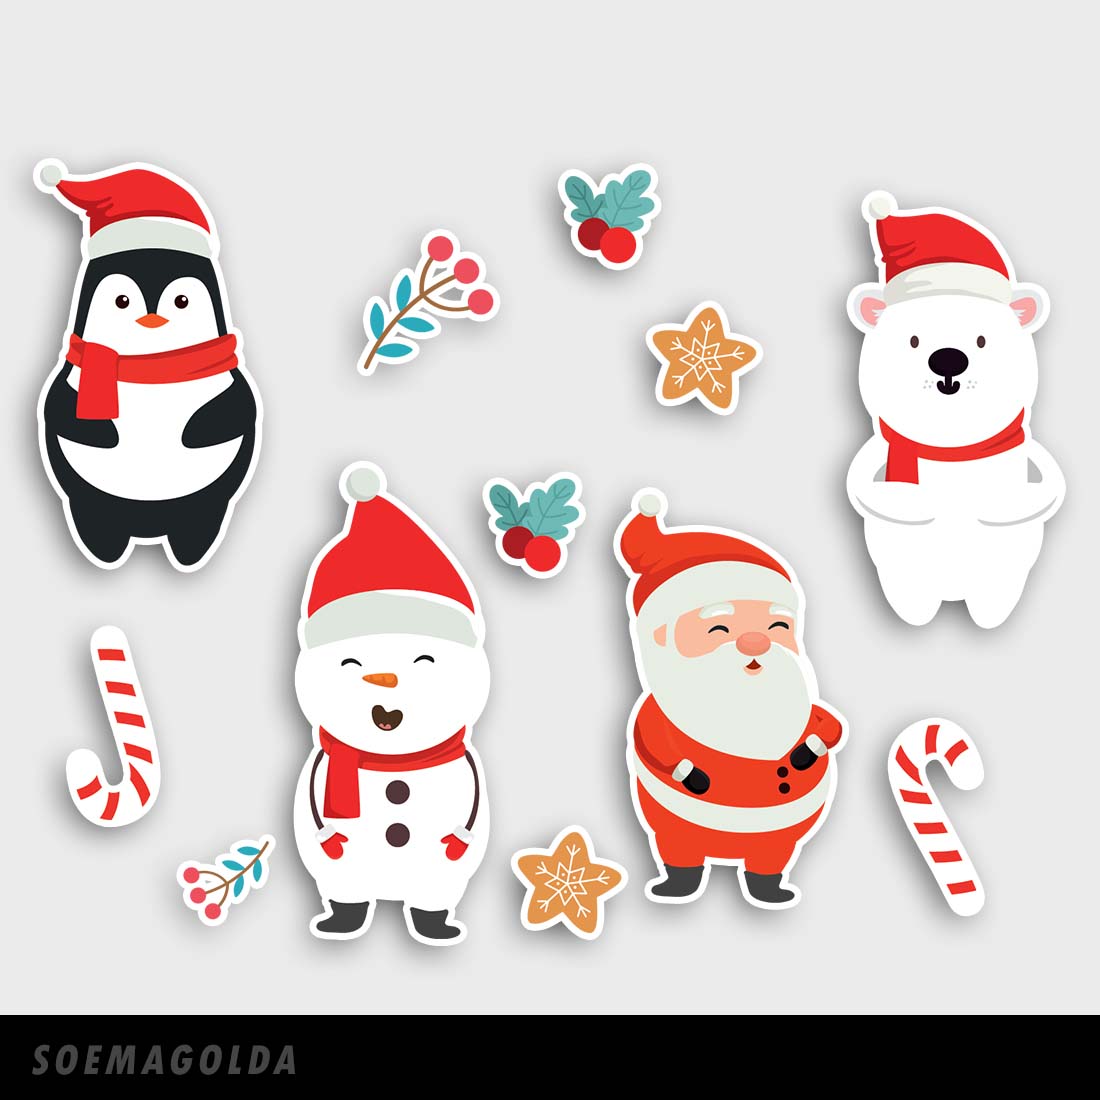 Christmas Character Cute Collection Design cover image.